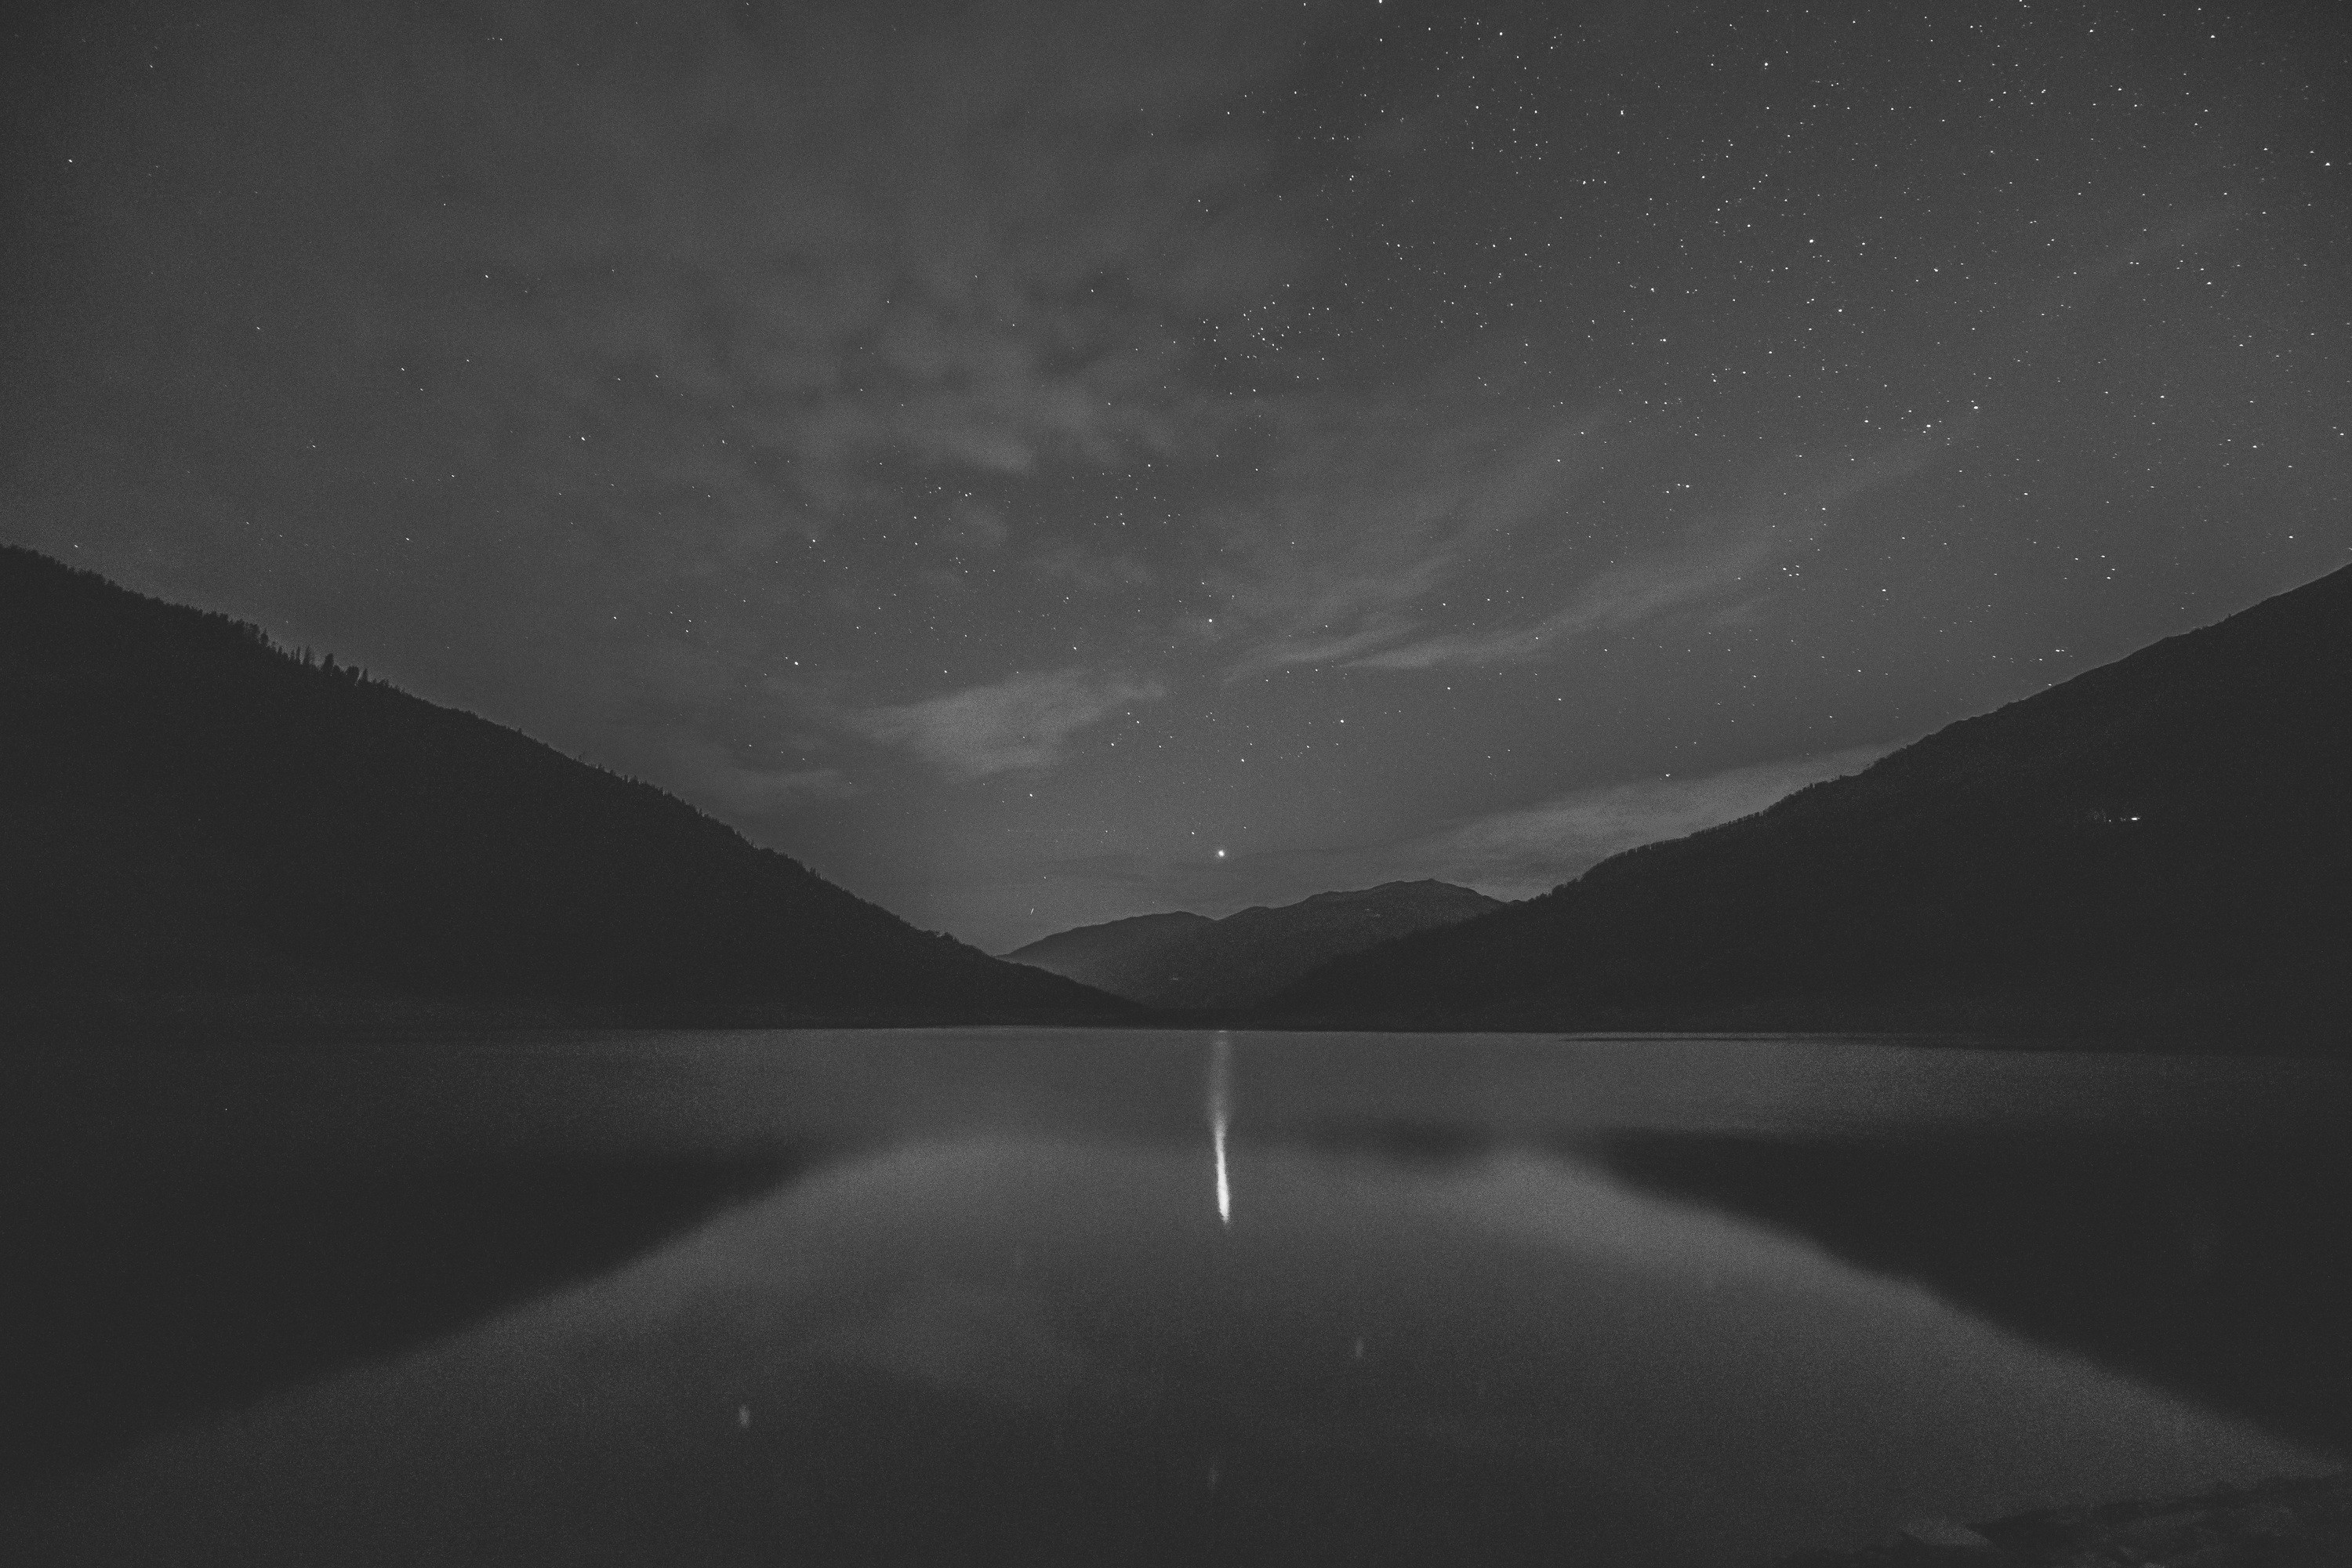 General 3000x2000 nature water moonlight monochrome night stars lake landscape mountains gray night sky sky starry night calm waters reflection